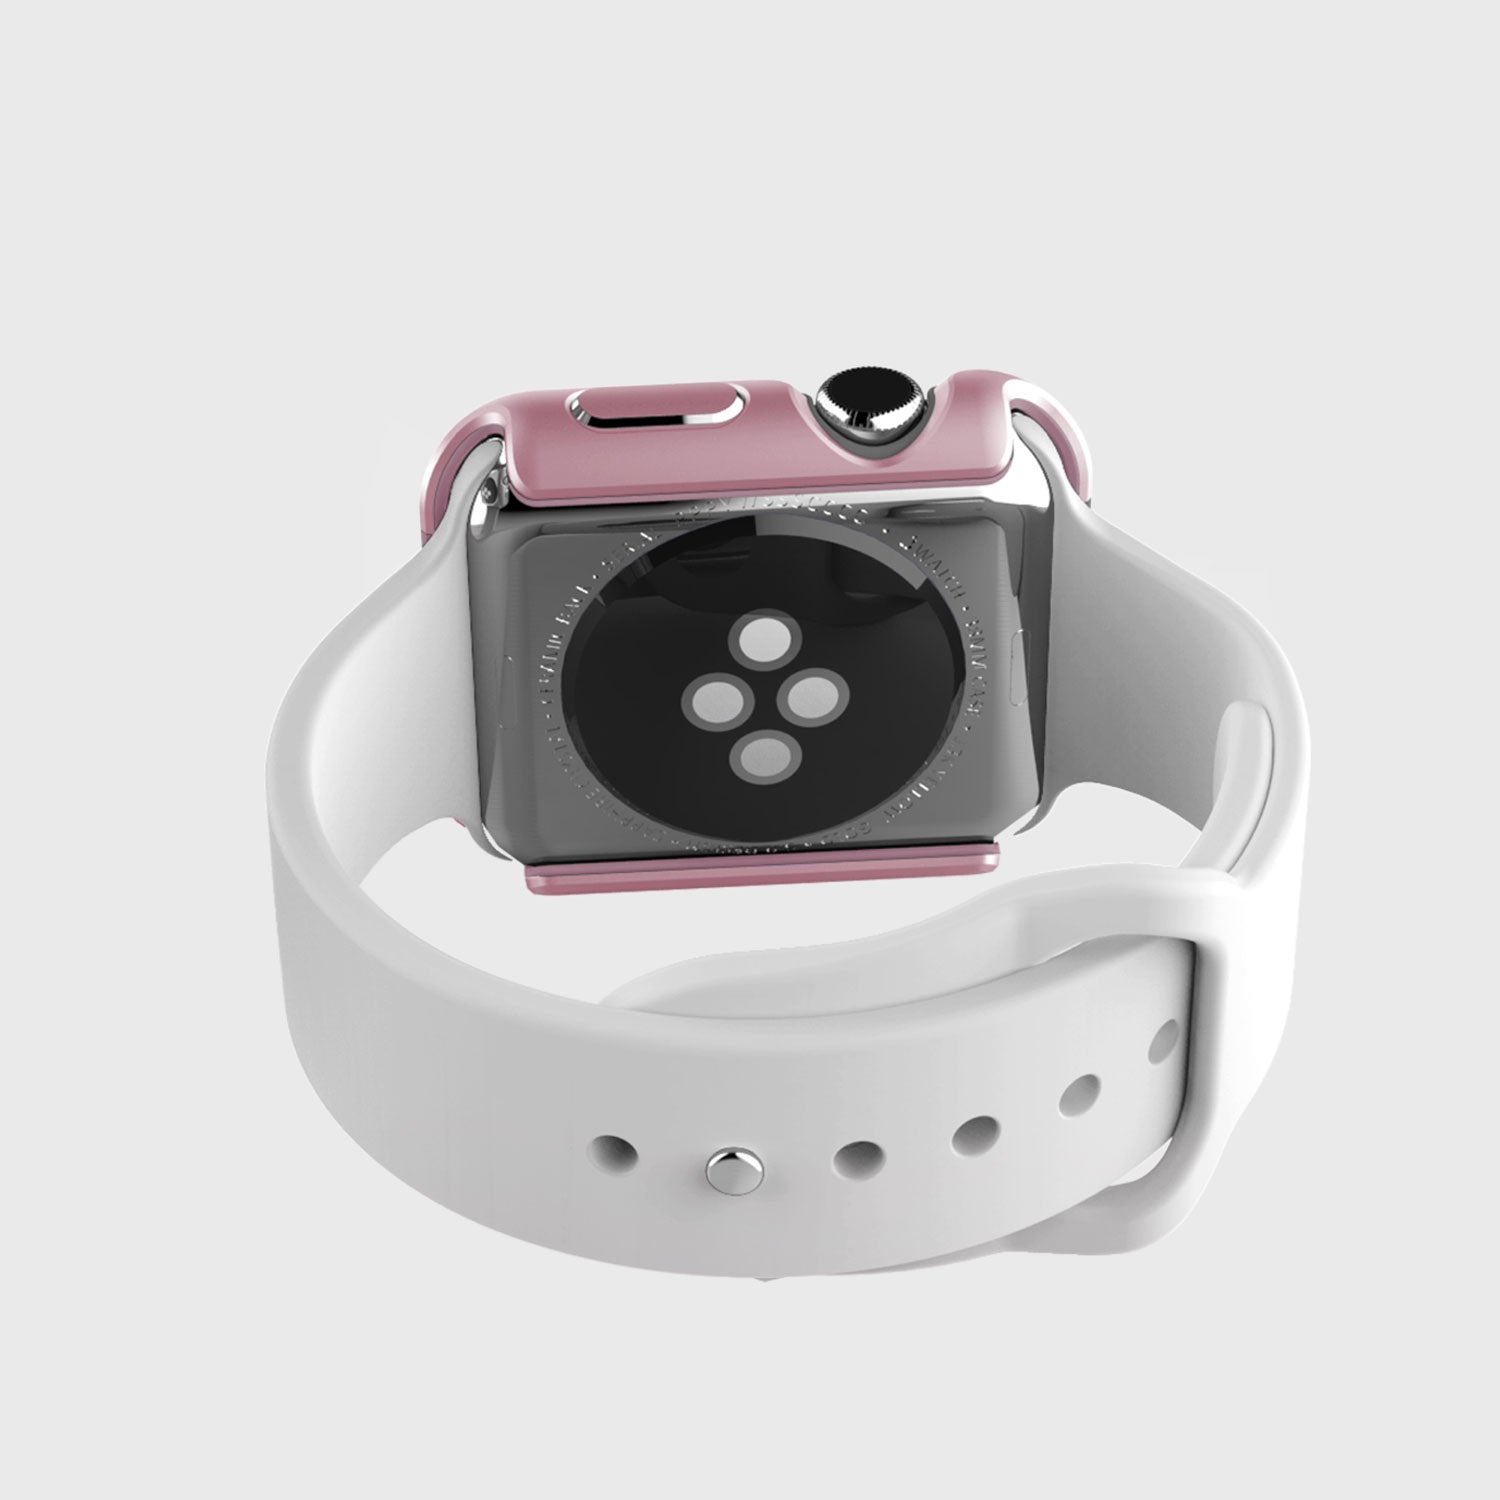 A Raptic Apple Watch 44mm Case - EDGE with a pink strap and a premium machined anodized aluminum bumper that protects.